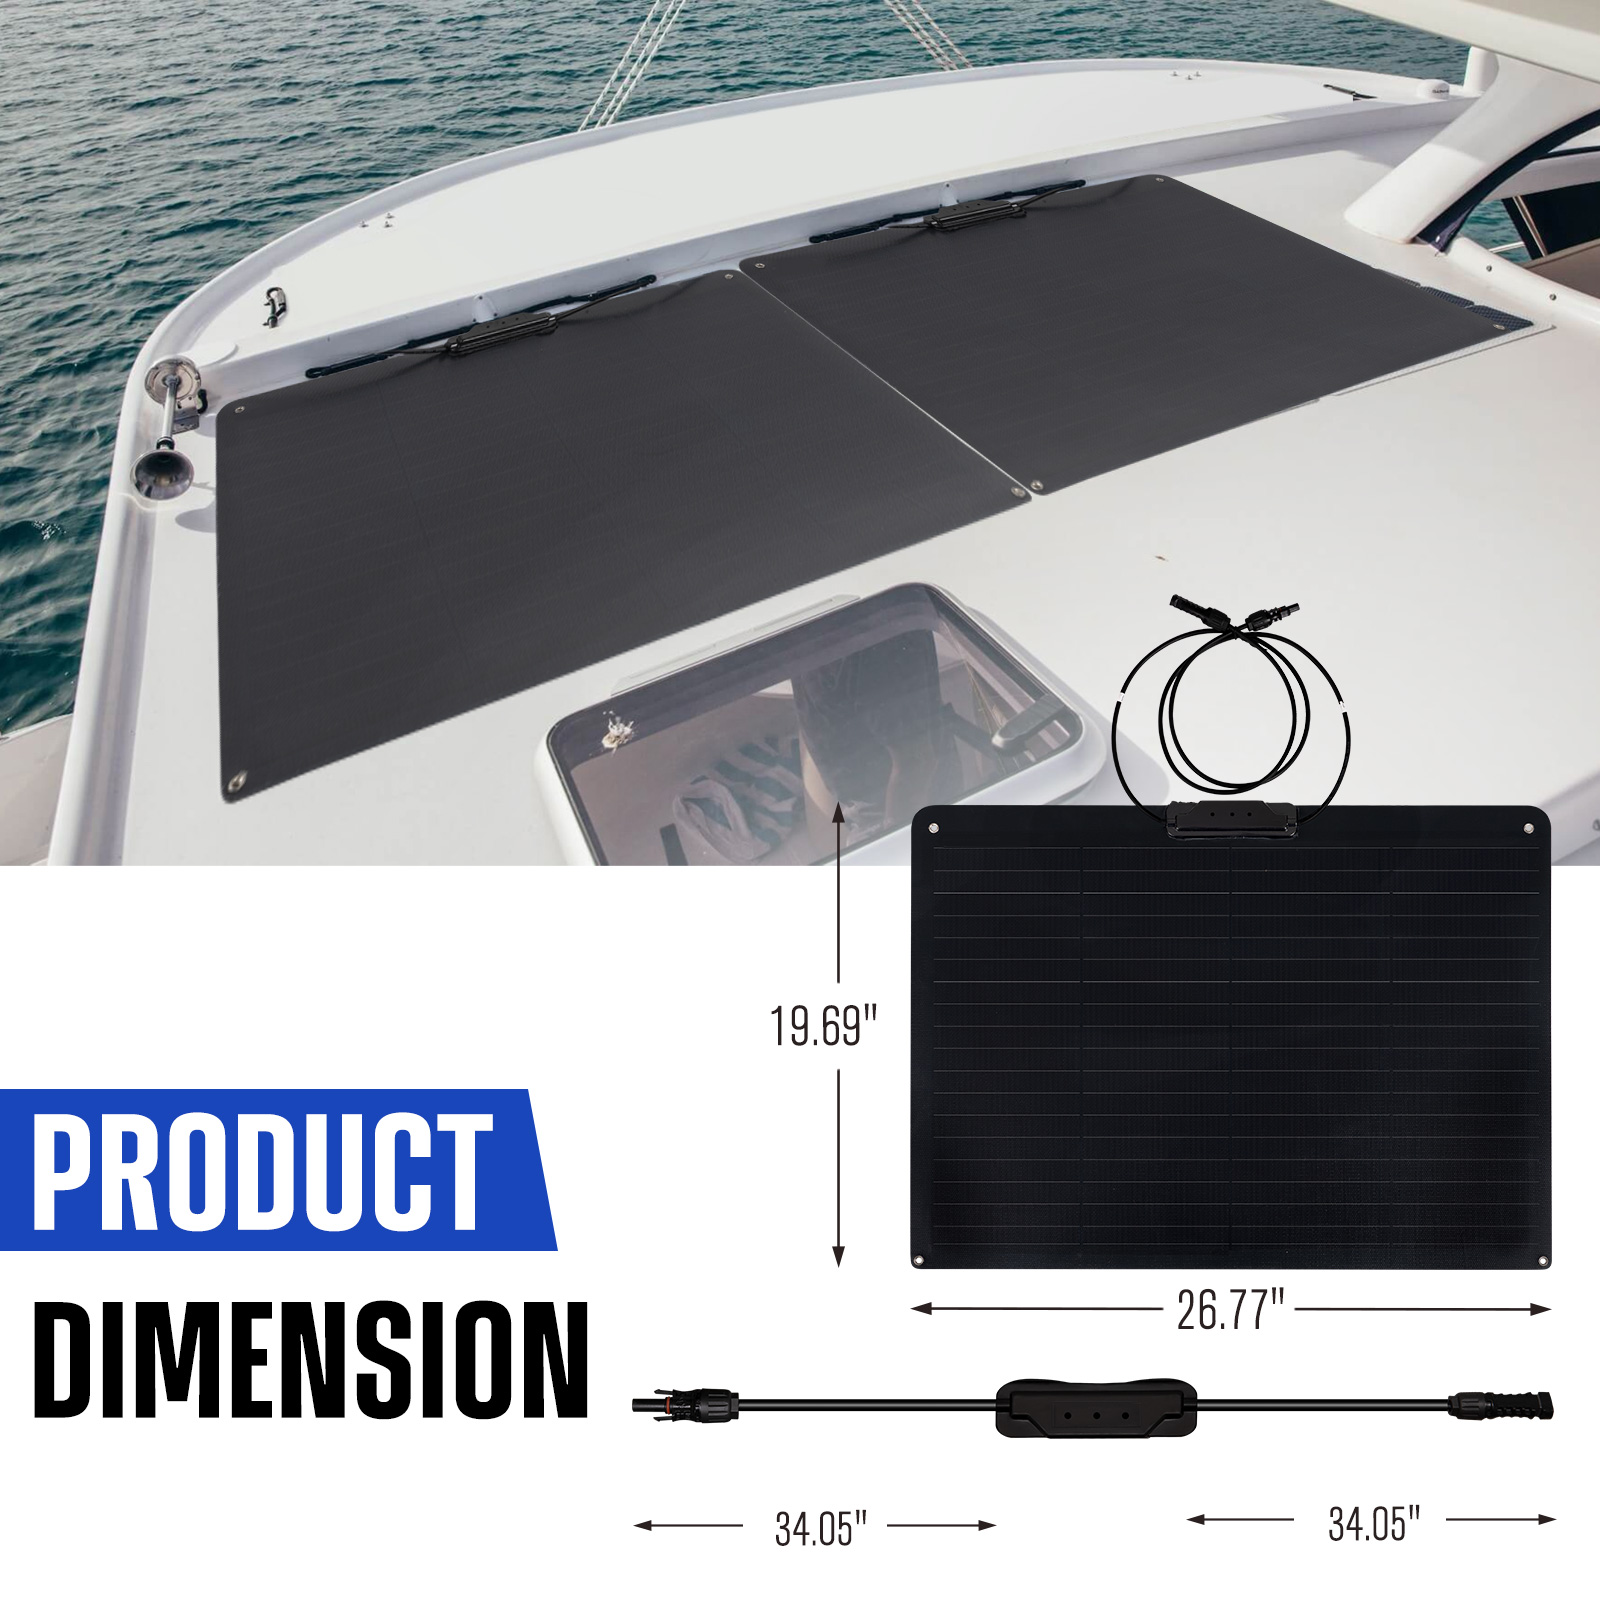 [US Direct] ATEM POWER 55W 12V Monocrystalline Flexible Solar Panel 245° Bendable 19.69*26.77Inch Portable Solar Charger With Uneven Surfaces Lightweight For RV Tent Roof Boat Cabin Marine Camping